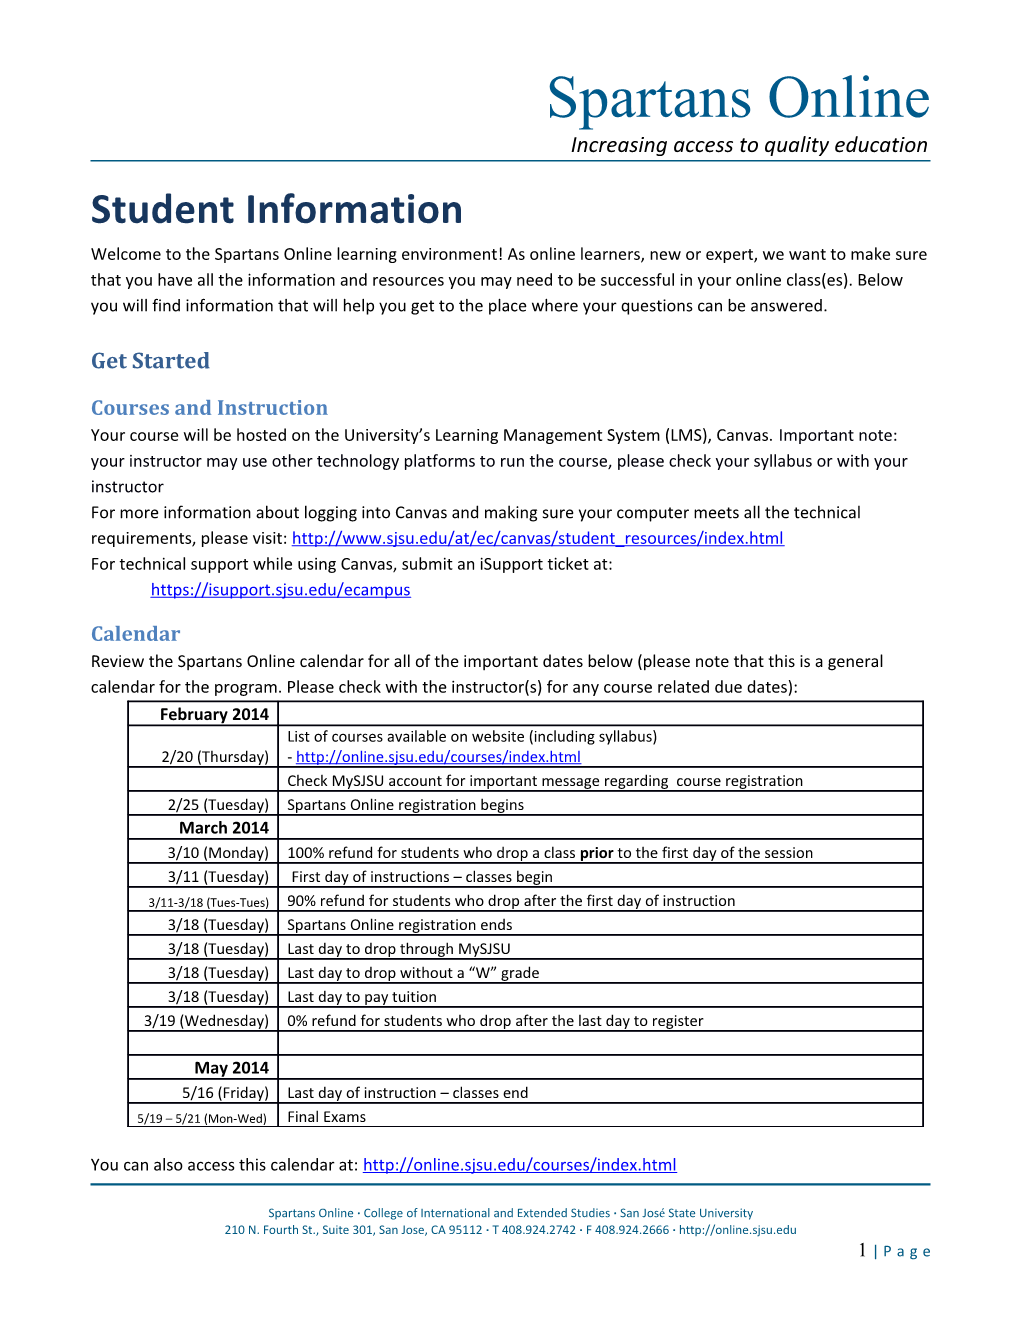 Student Information s9